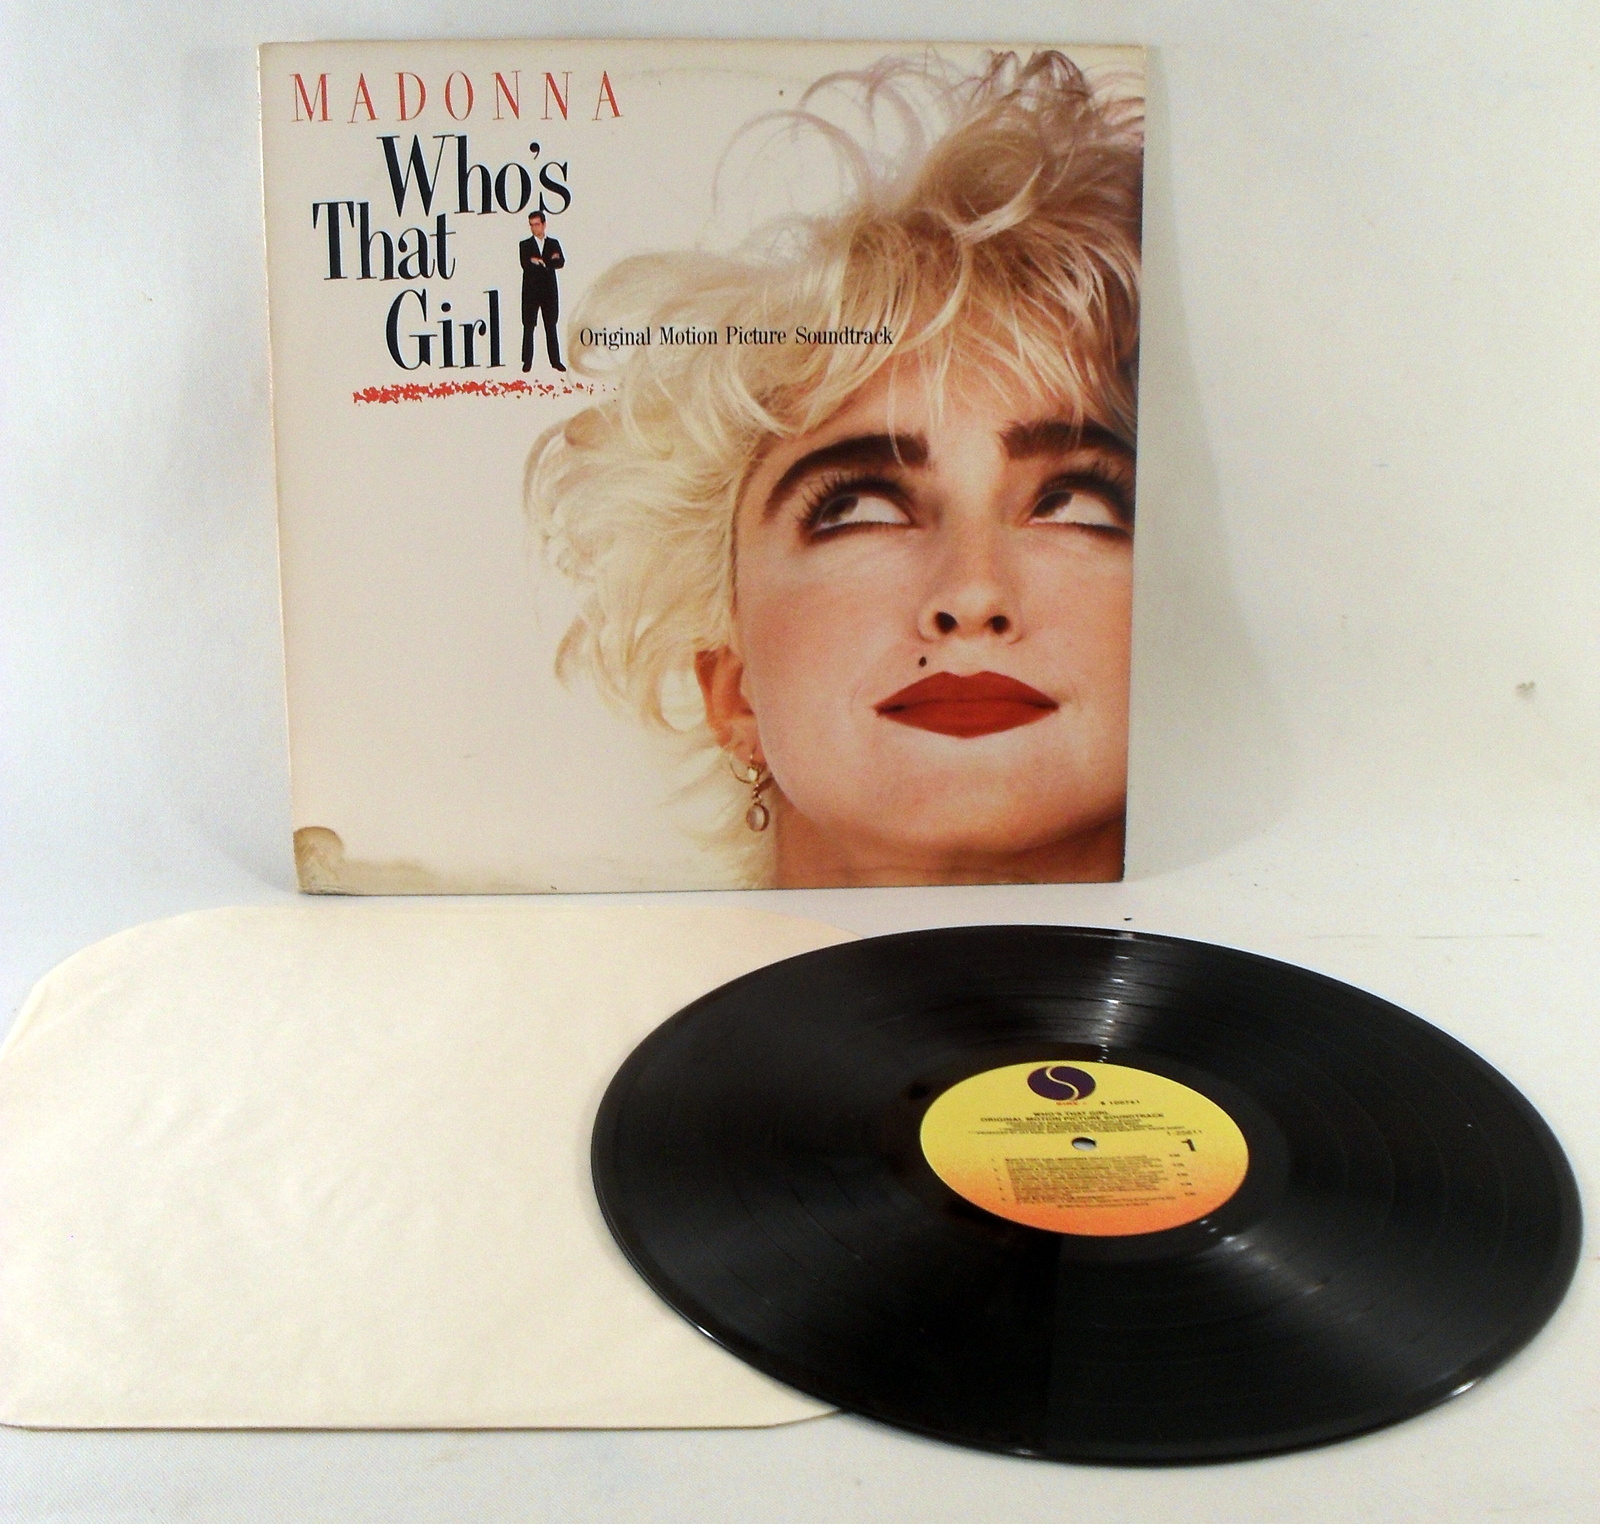 Madonna Who's That Girl Album July 21, 1987 - Records